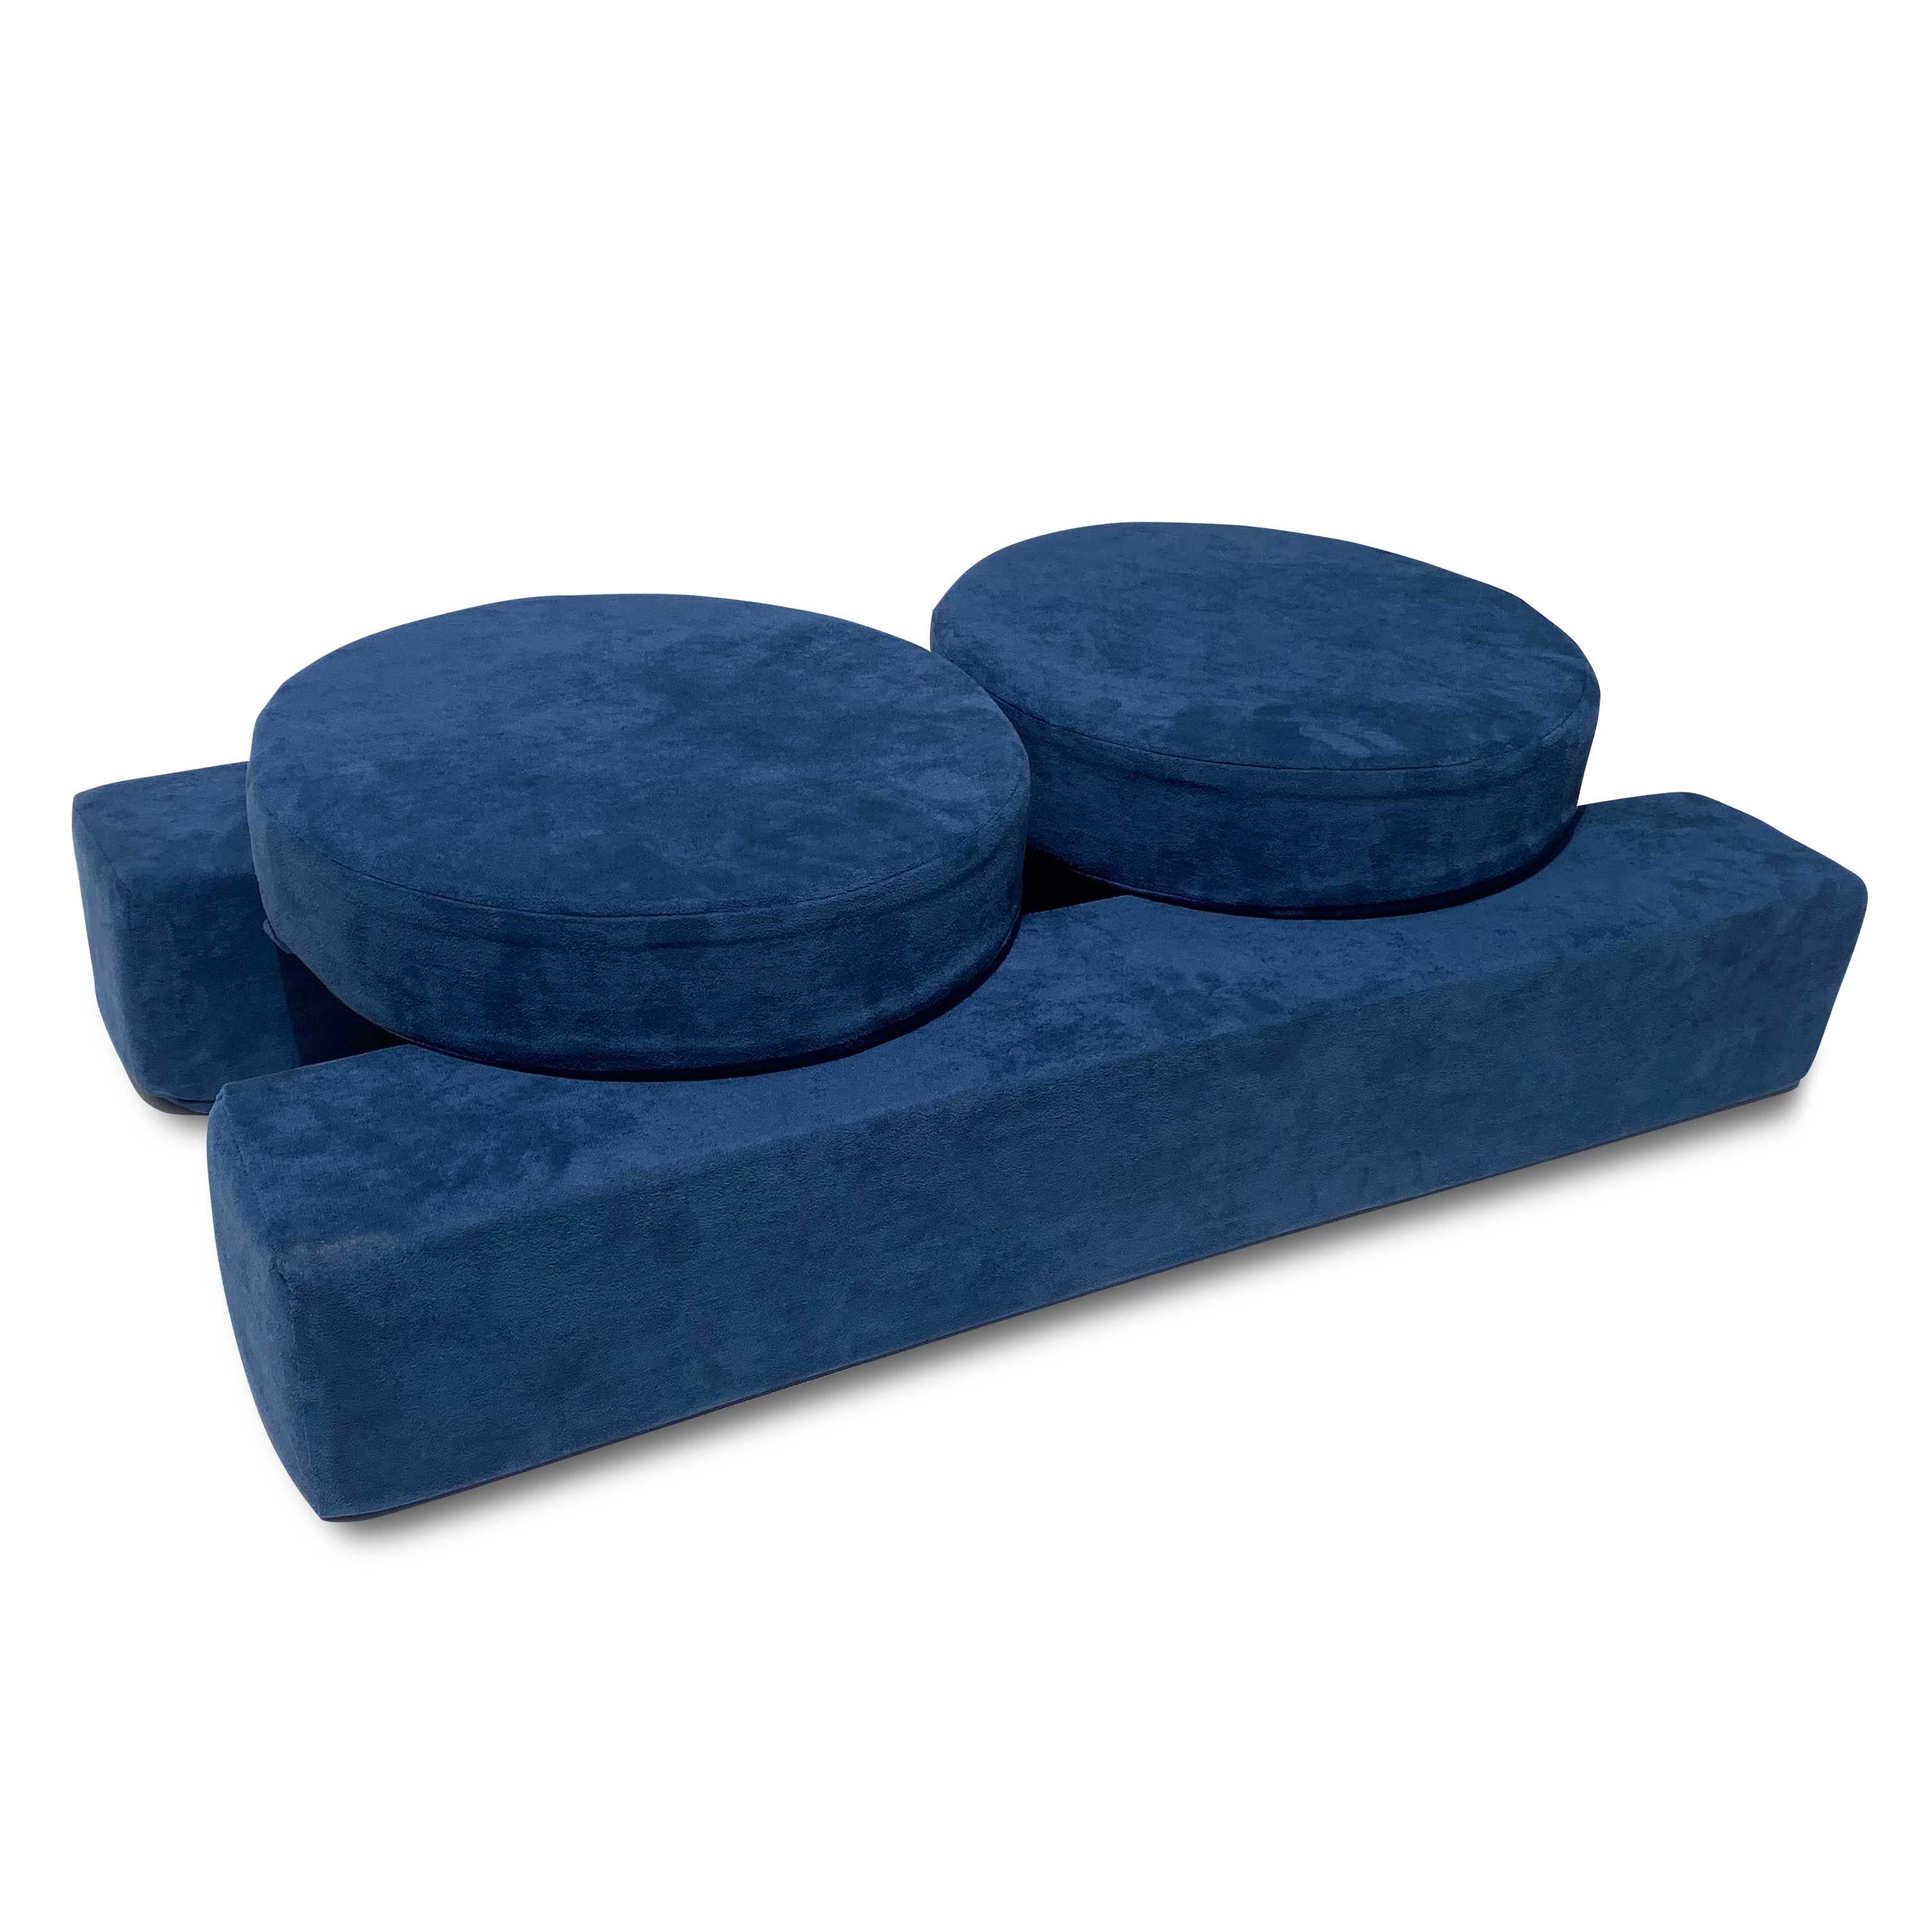 Mod Blox 2 Circle Pillow + 2 Armrests Add-On for Soft Furniture Playset Modular Microsuede Foam Play Couch for Creative Kids